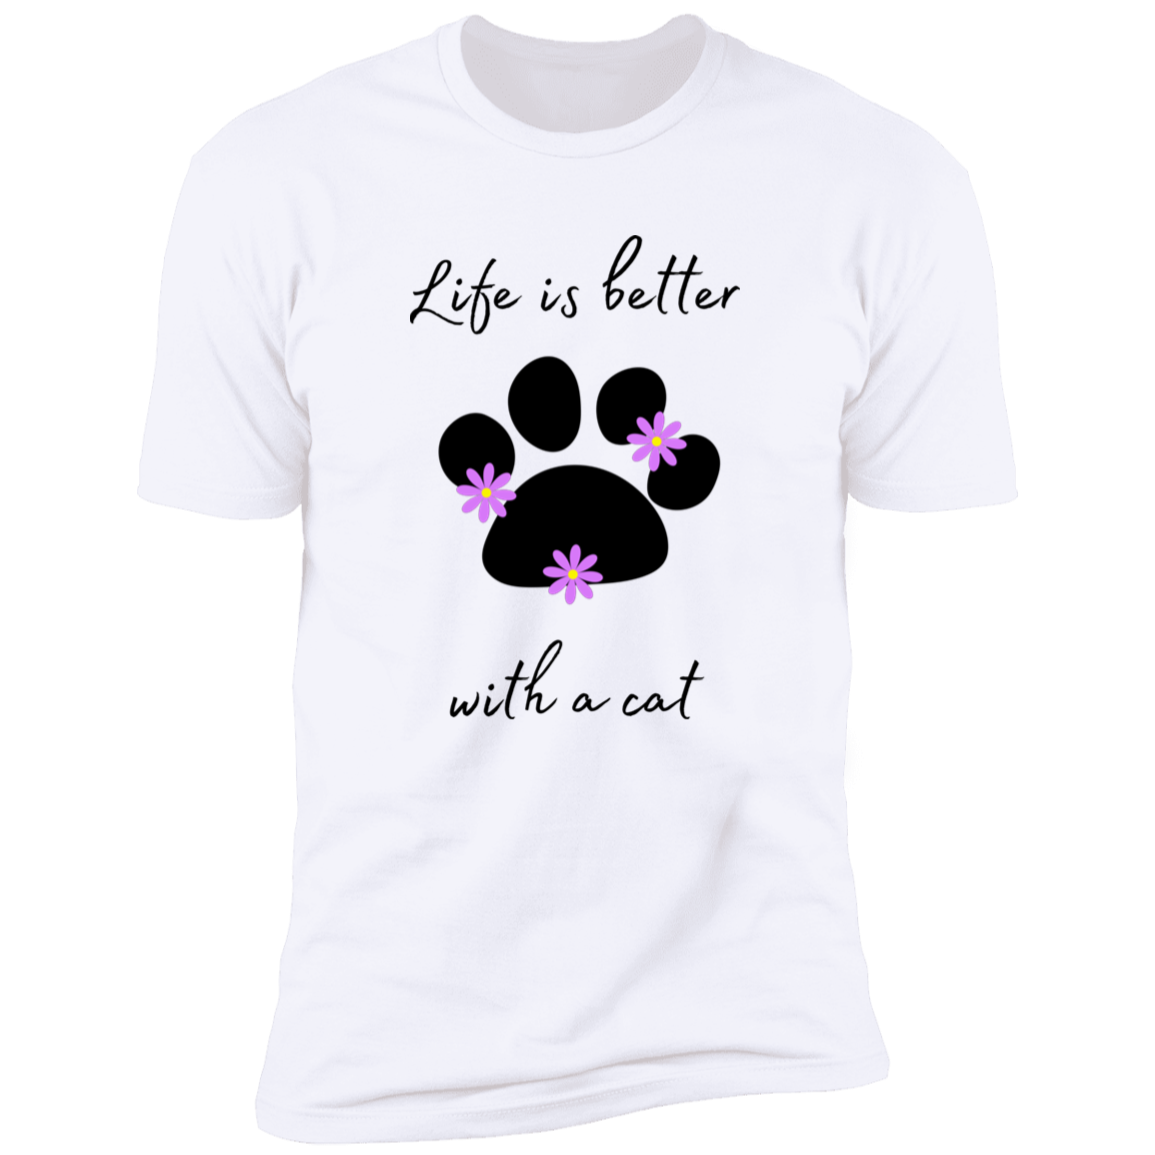 Life is Better with a Cat (Flower) cat t-shirt, cat shirt for humans, cat themed t-shirt, in white